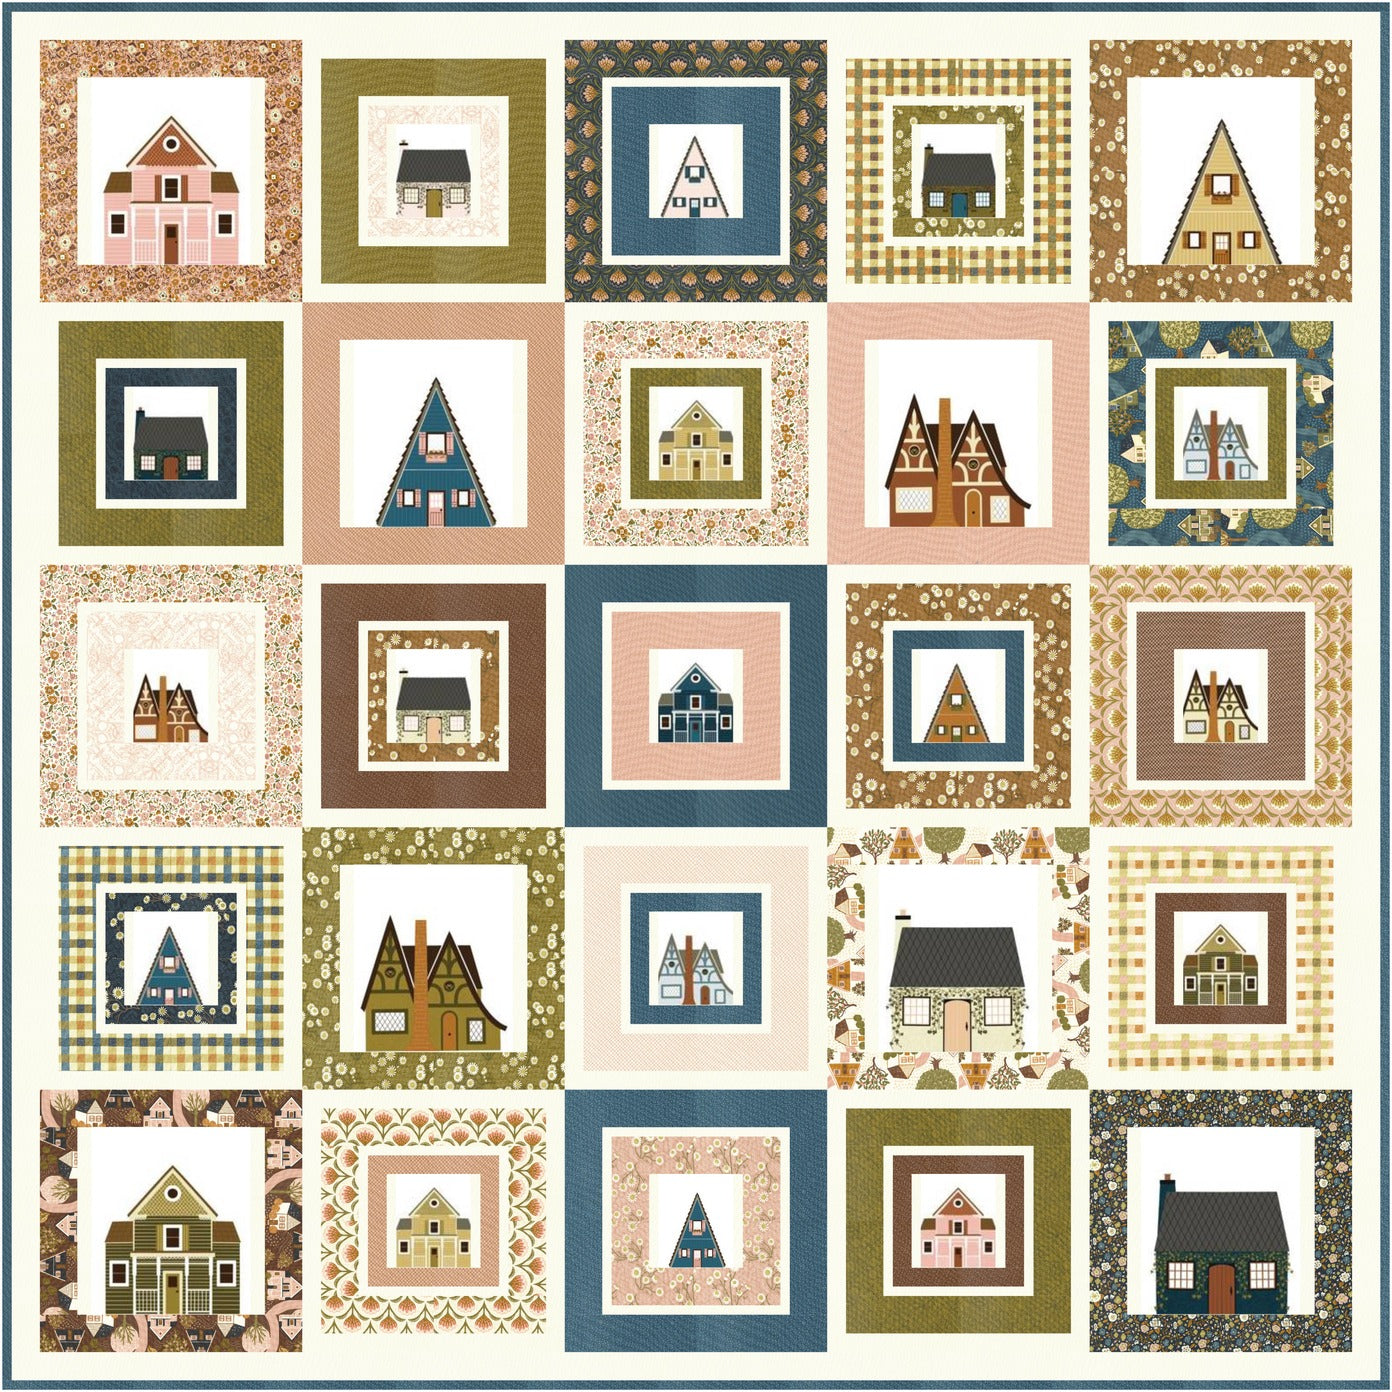 Printed Quilt Patterns